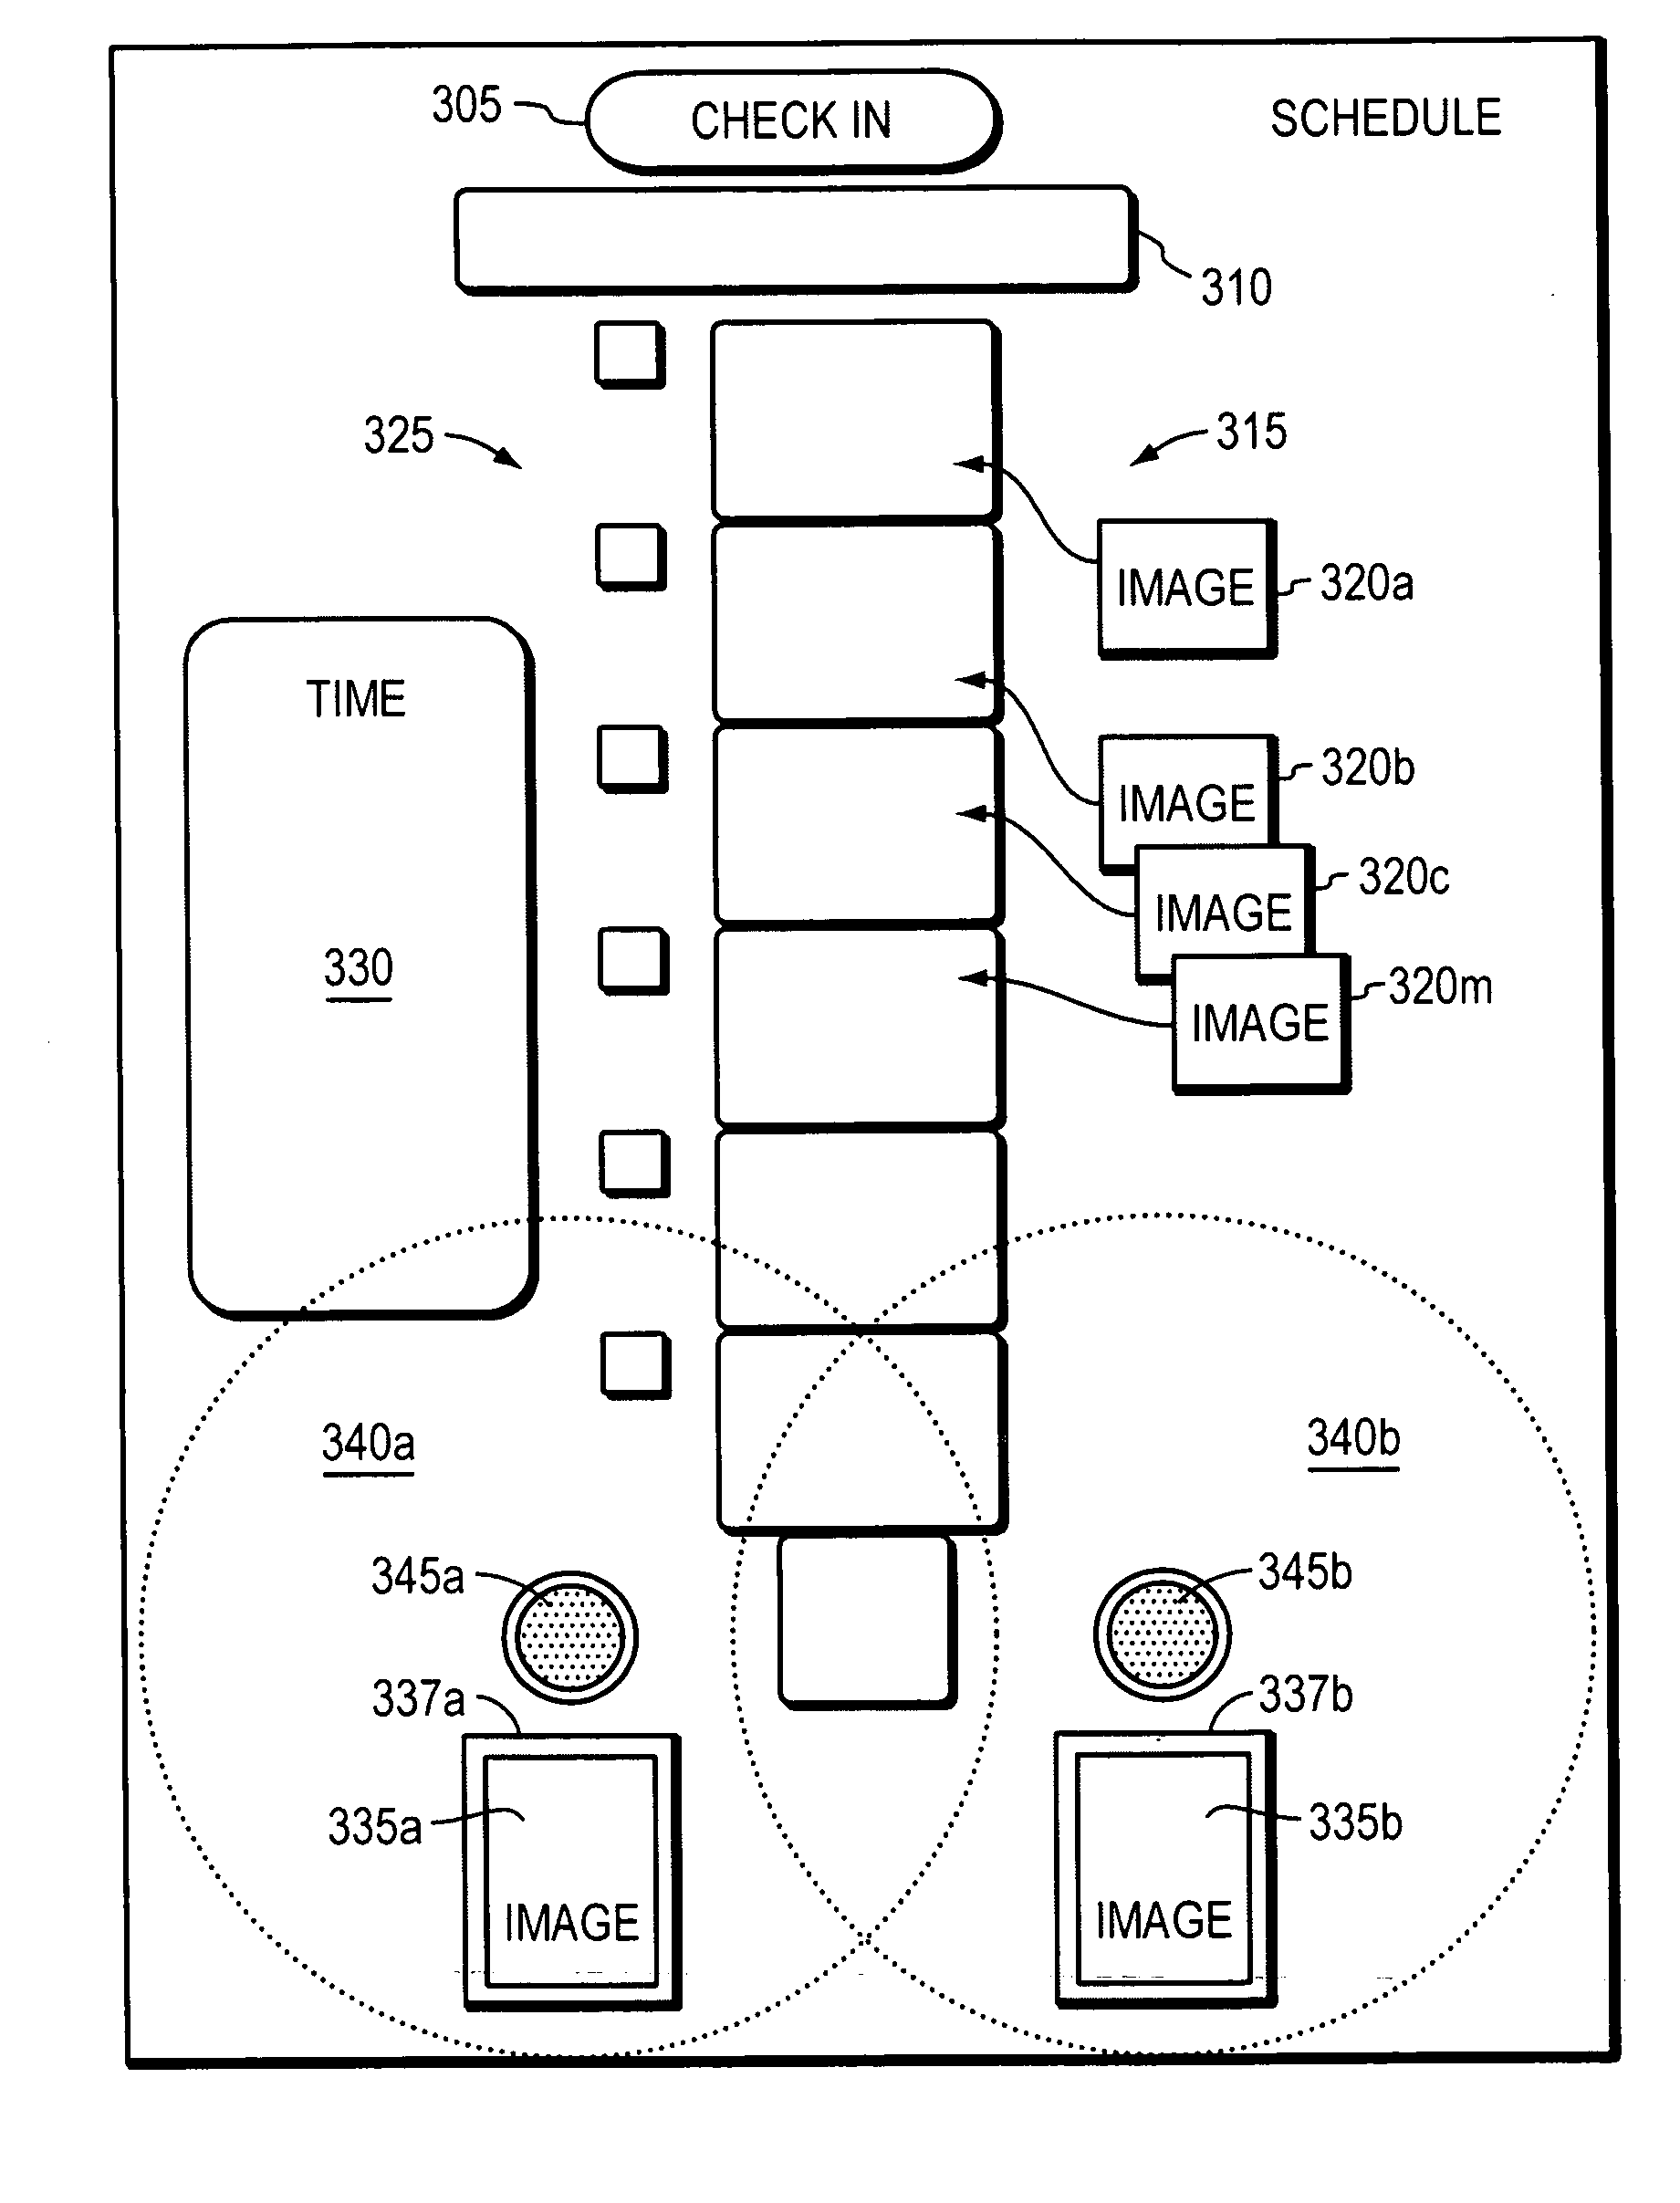 Method and apparatus for developing a person's behavior